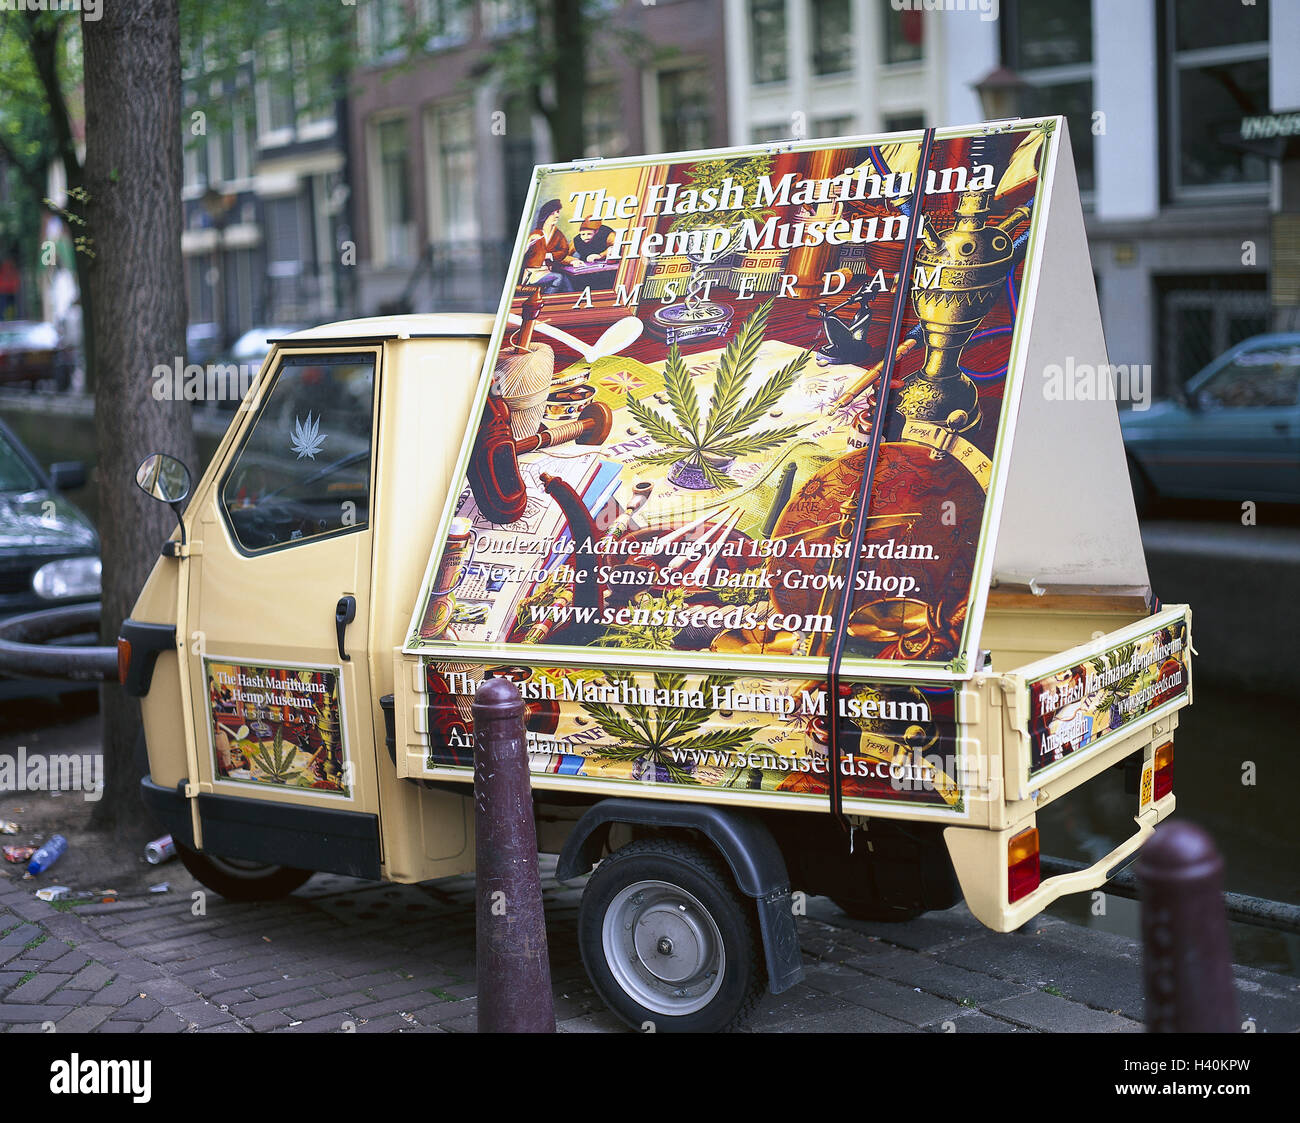 The Netherlands, Amsterdam, lane, vehicle, advertising sign 'Hash, marihuana Hemp museum', Europe, Benelux, Holland, capital, roadside, tricycle, Piaggio, advertising vehicle, advertisement, advertisement, advertising label, drugs, drugs, legality, place Stock Photo